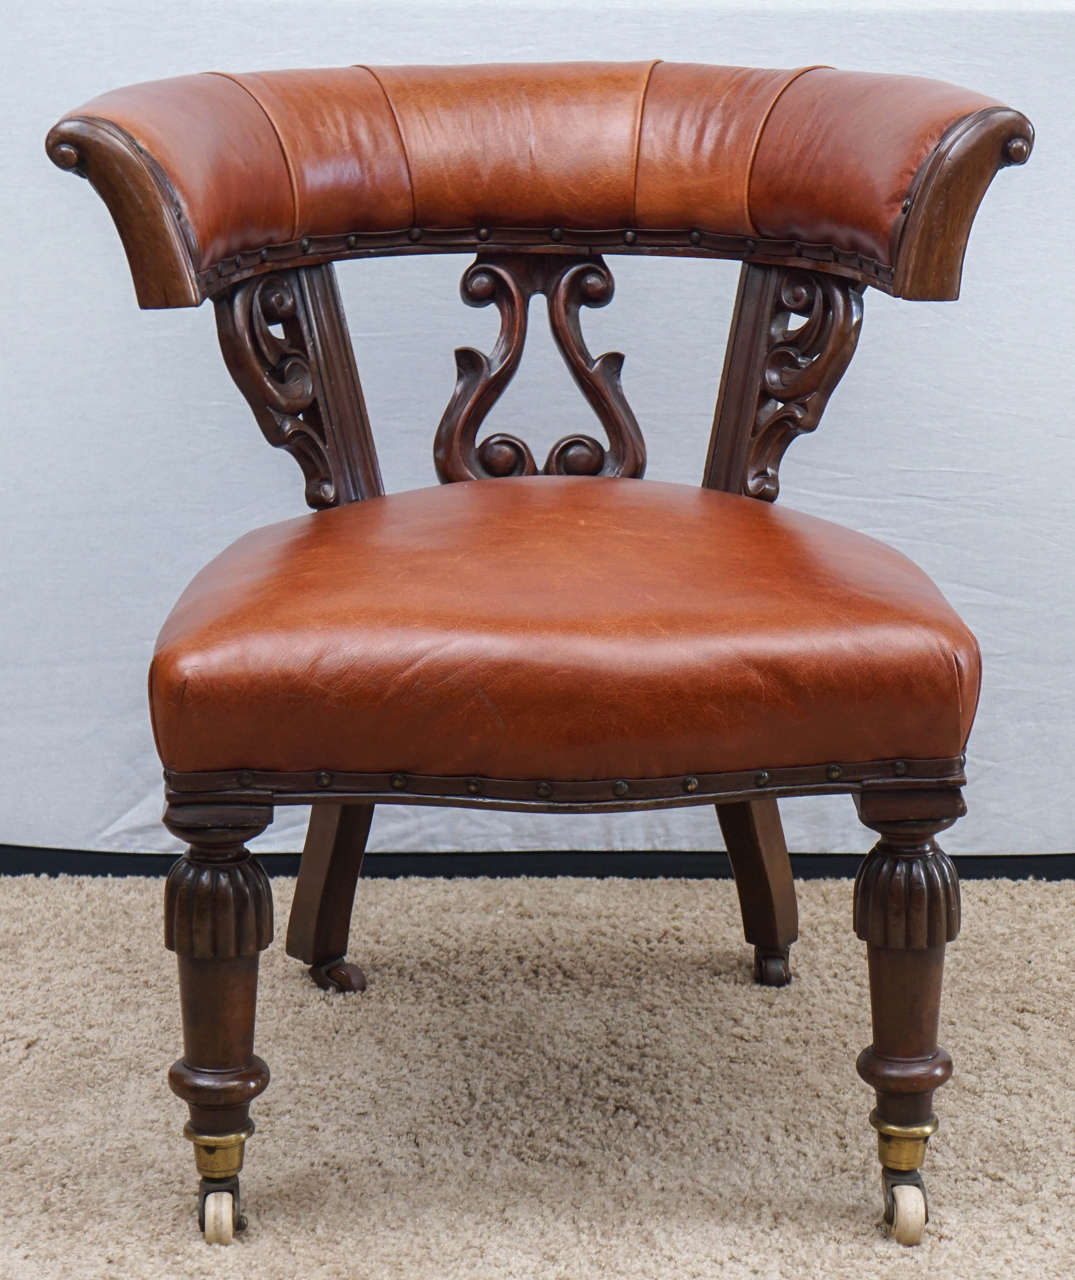 This wonderful leather and mahogany chair is as lovely as it is useful. As an accent or desk chair, the piece shouts English elegance. The reviews are mixed about the seat, some who sit think the seat needs new springs, while others find it